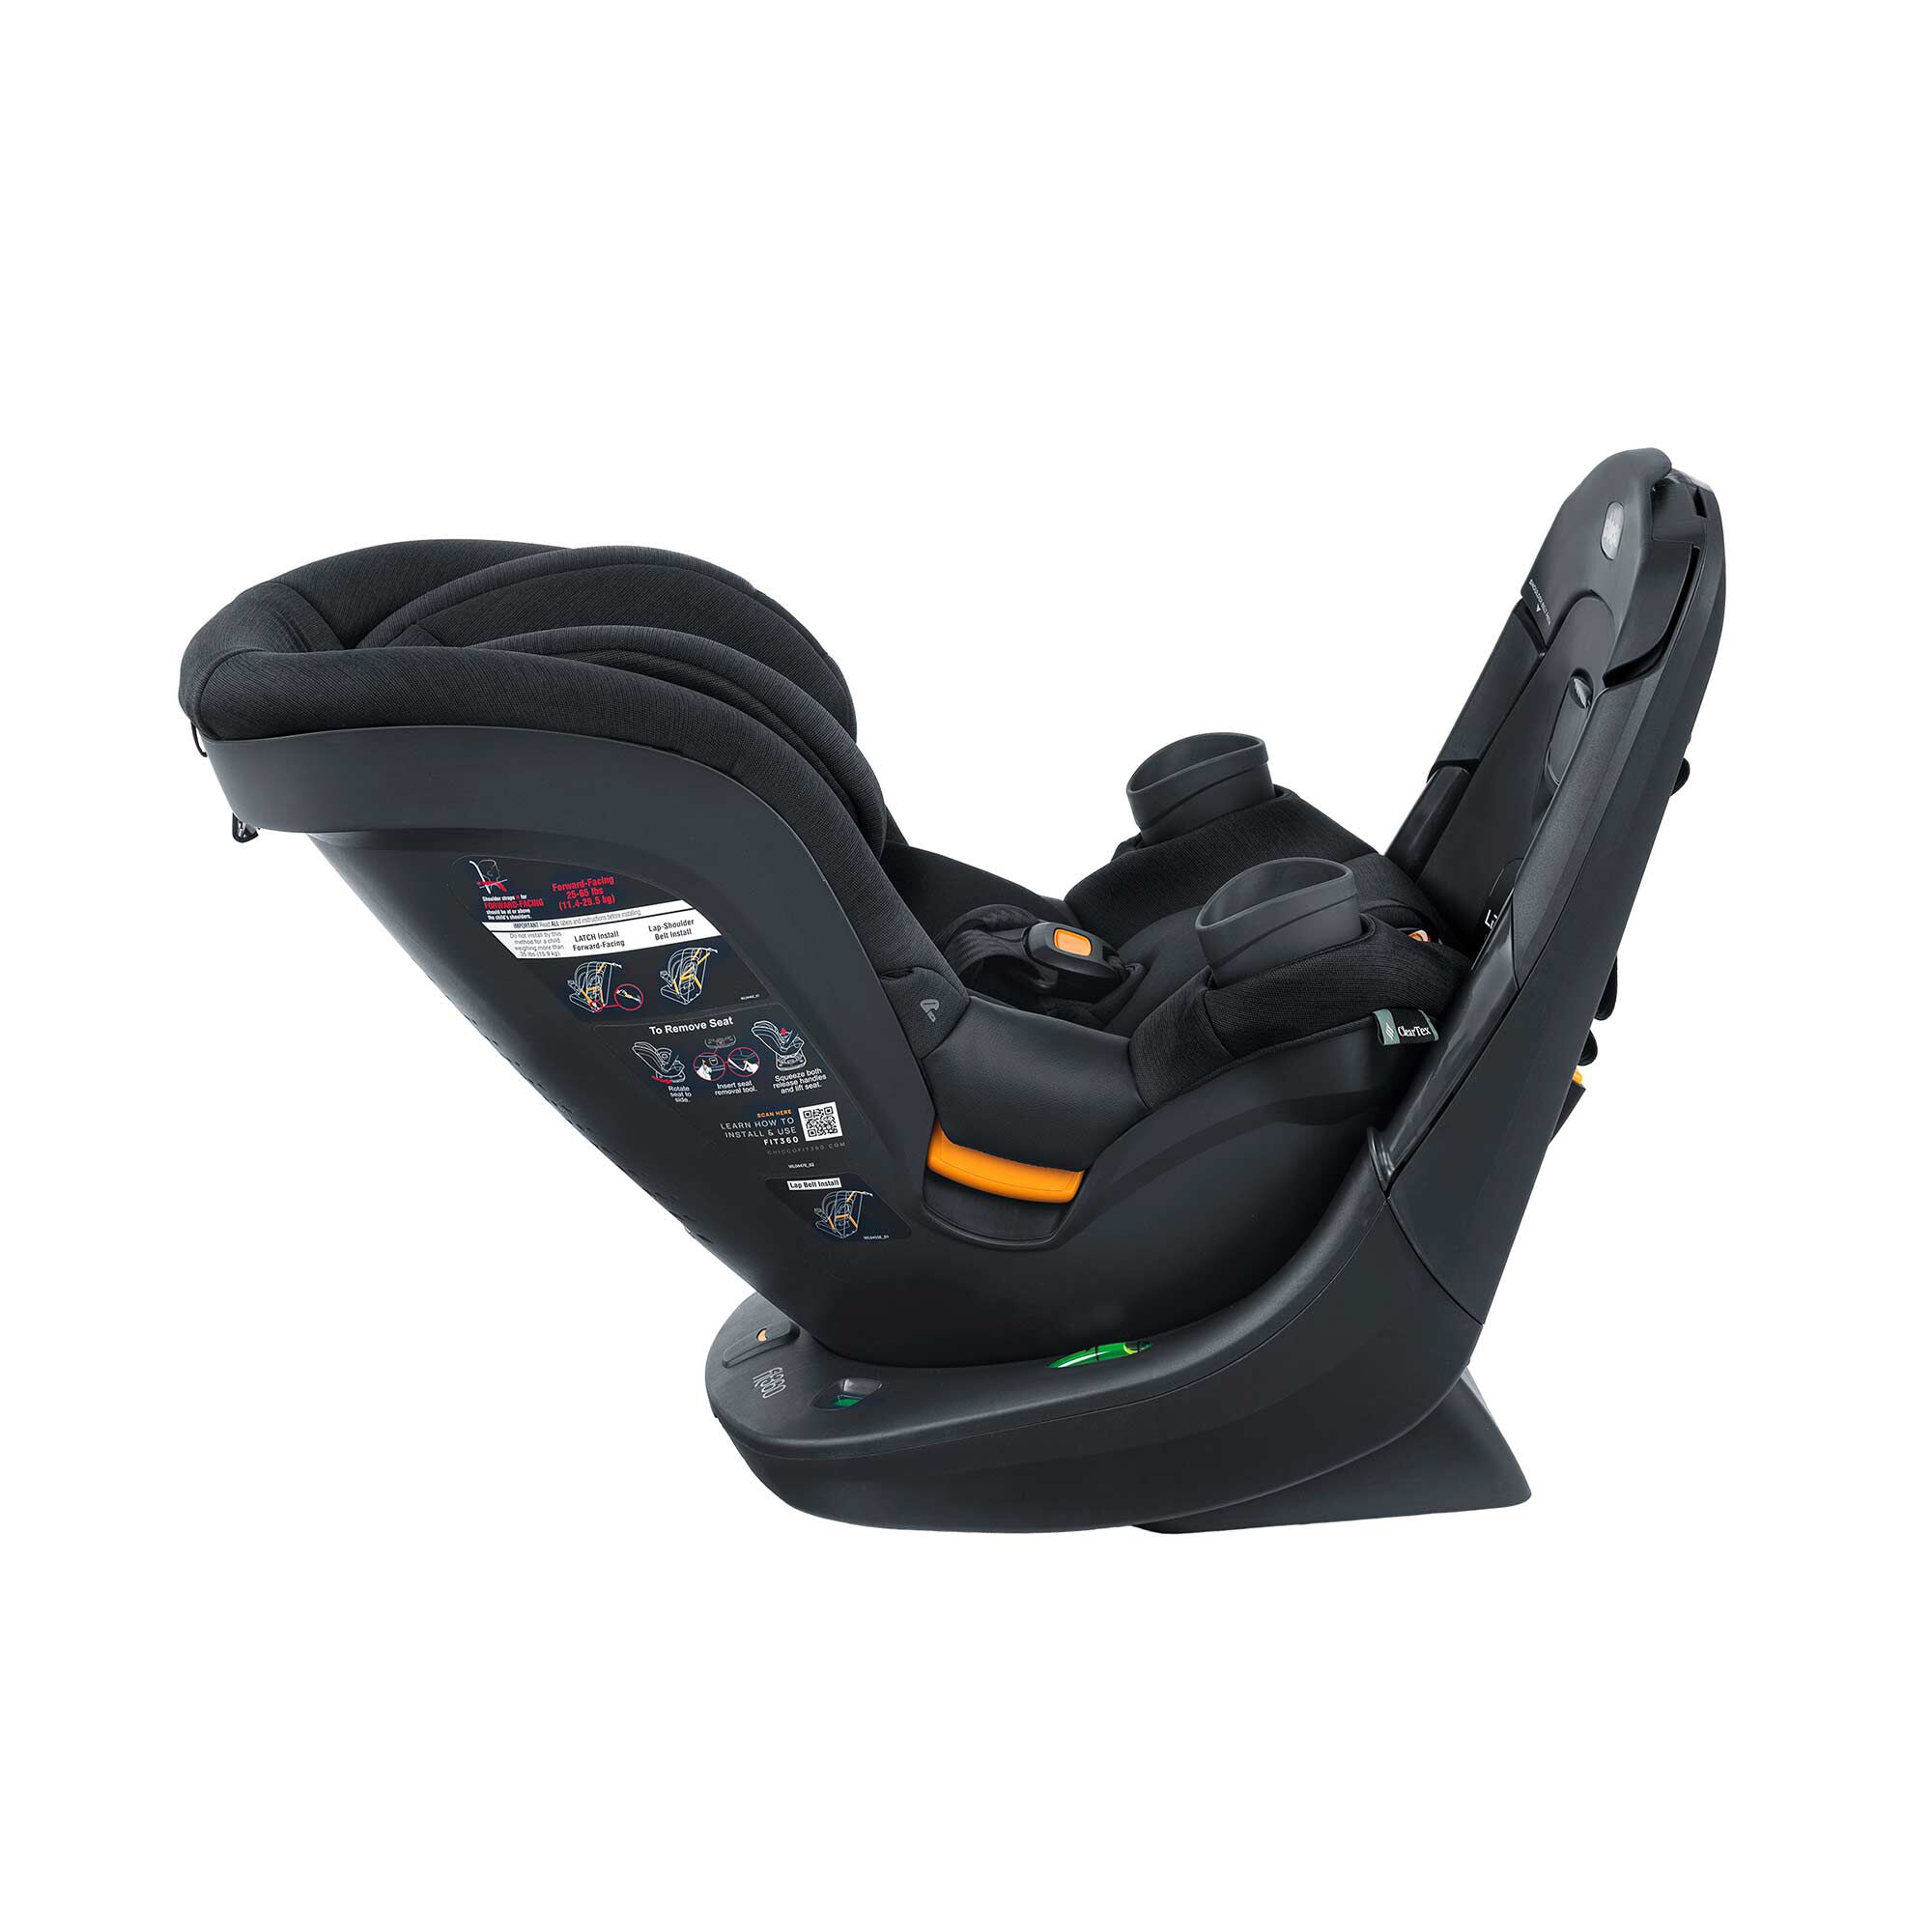 Chicco Fit360 ClearTex Rotating Convertible Car Seat - Black